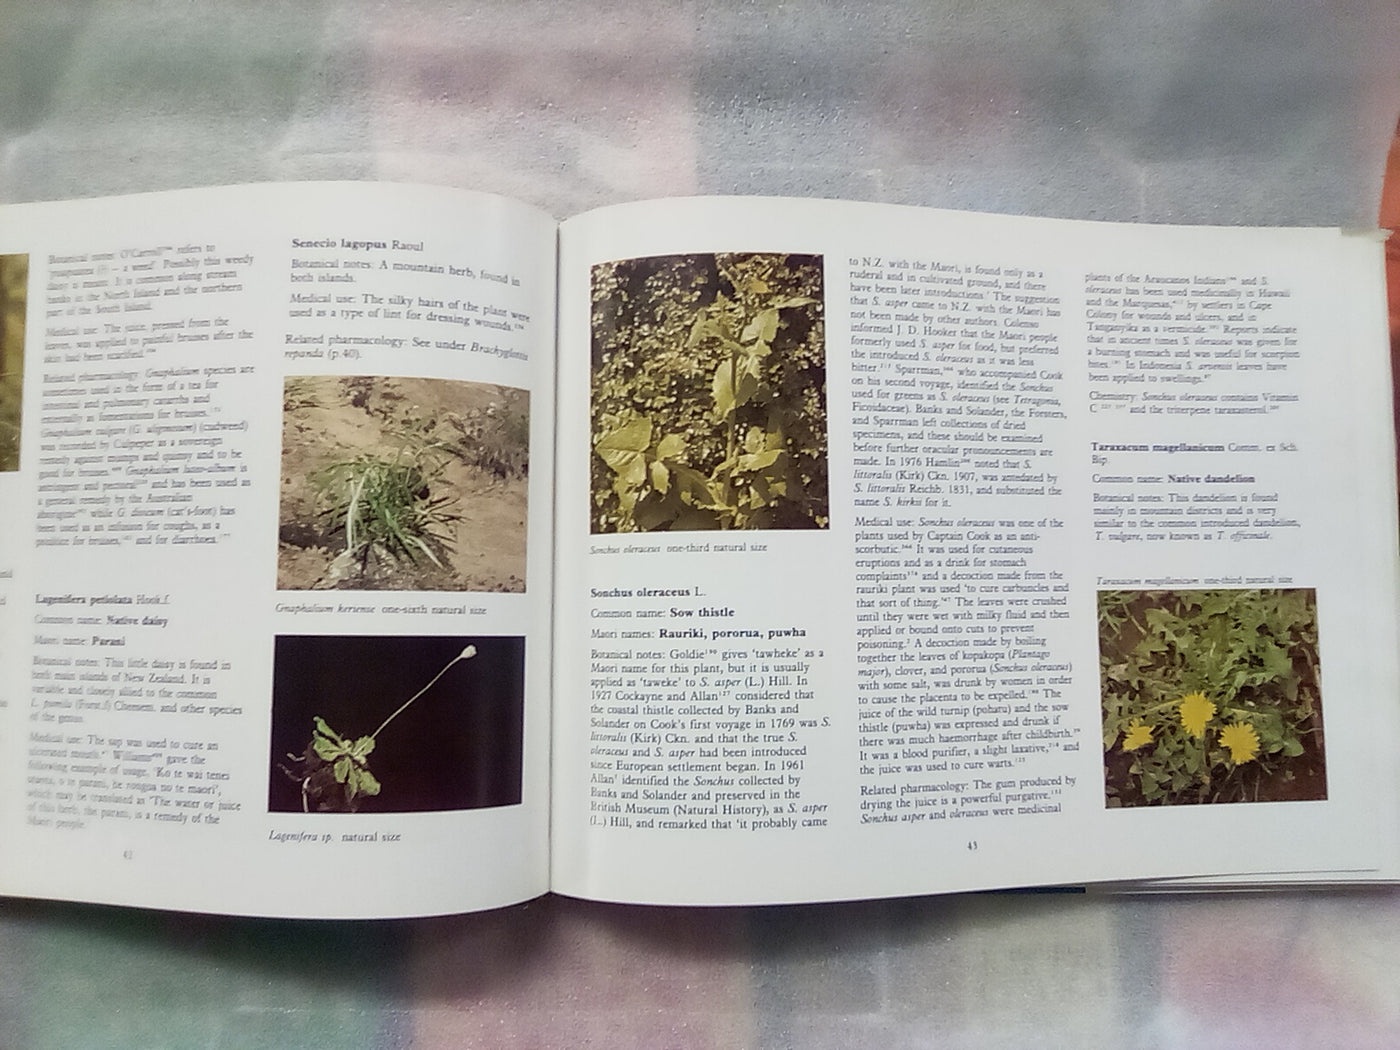 New Zealand Medicinal Plants (1981) by Brooker, Cambie, & Cooper